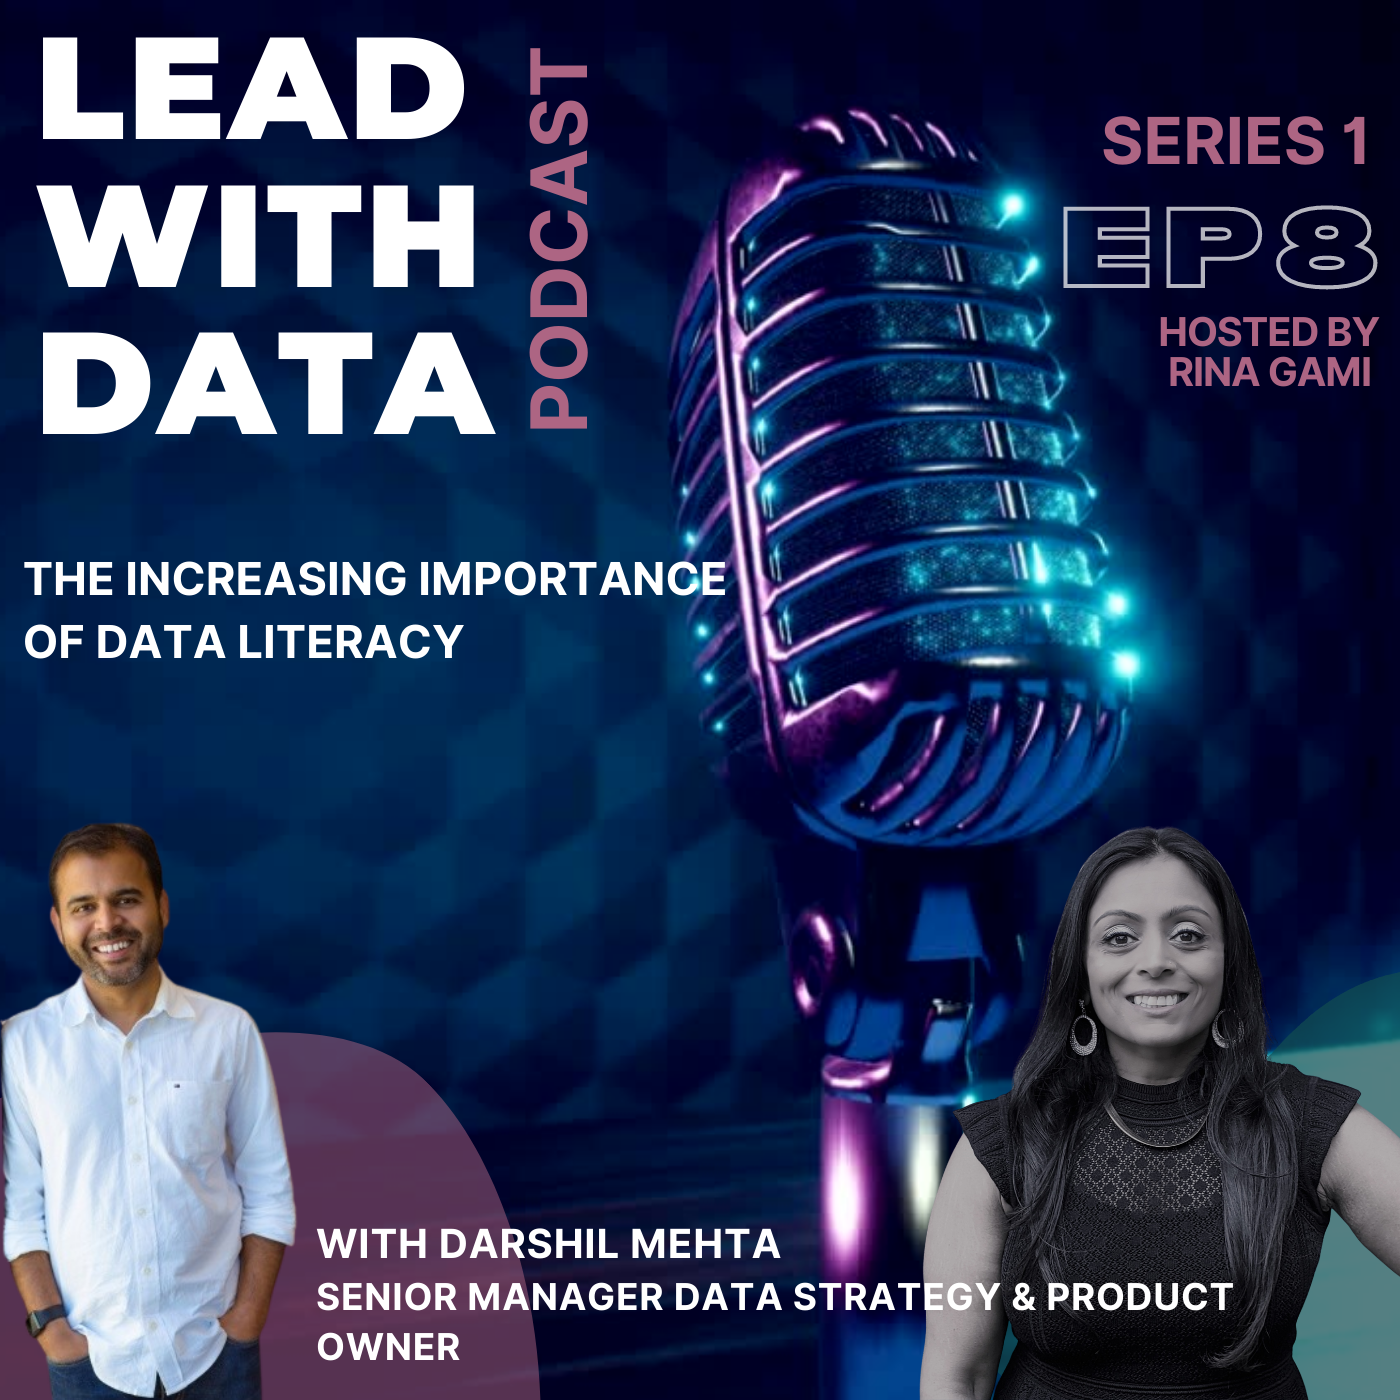 Artwork for podcast LEAD WITH DATA Podcast